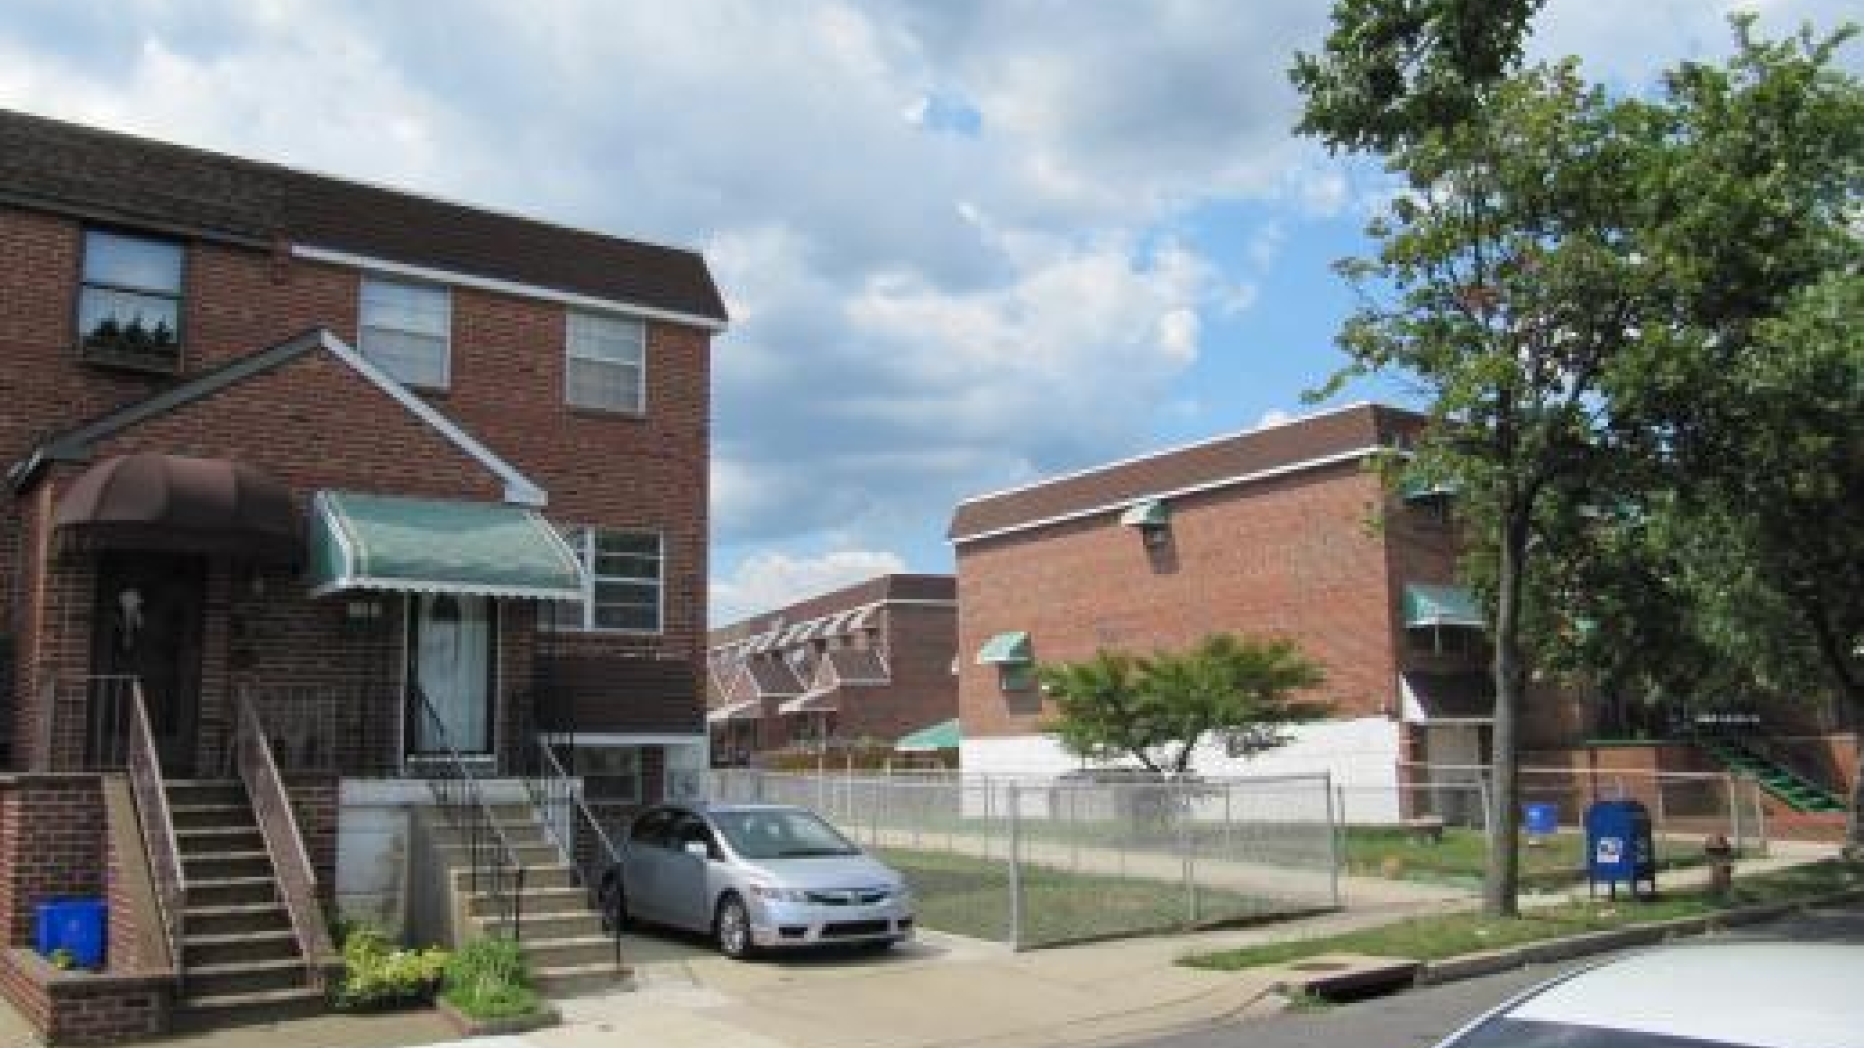 A street view of a residential area in West Philadelphia.